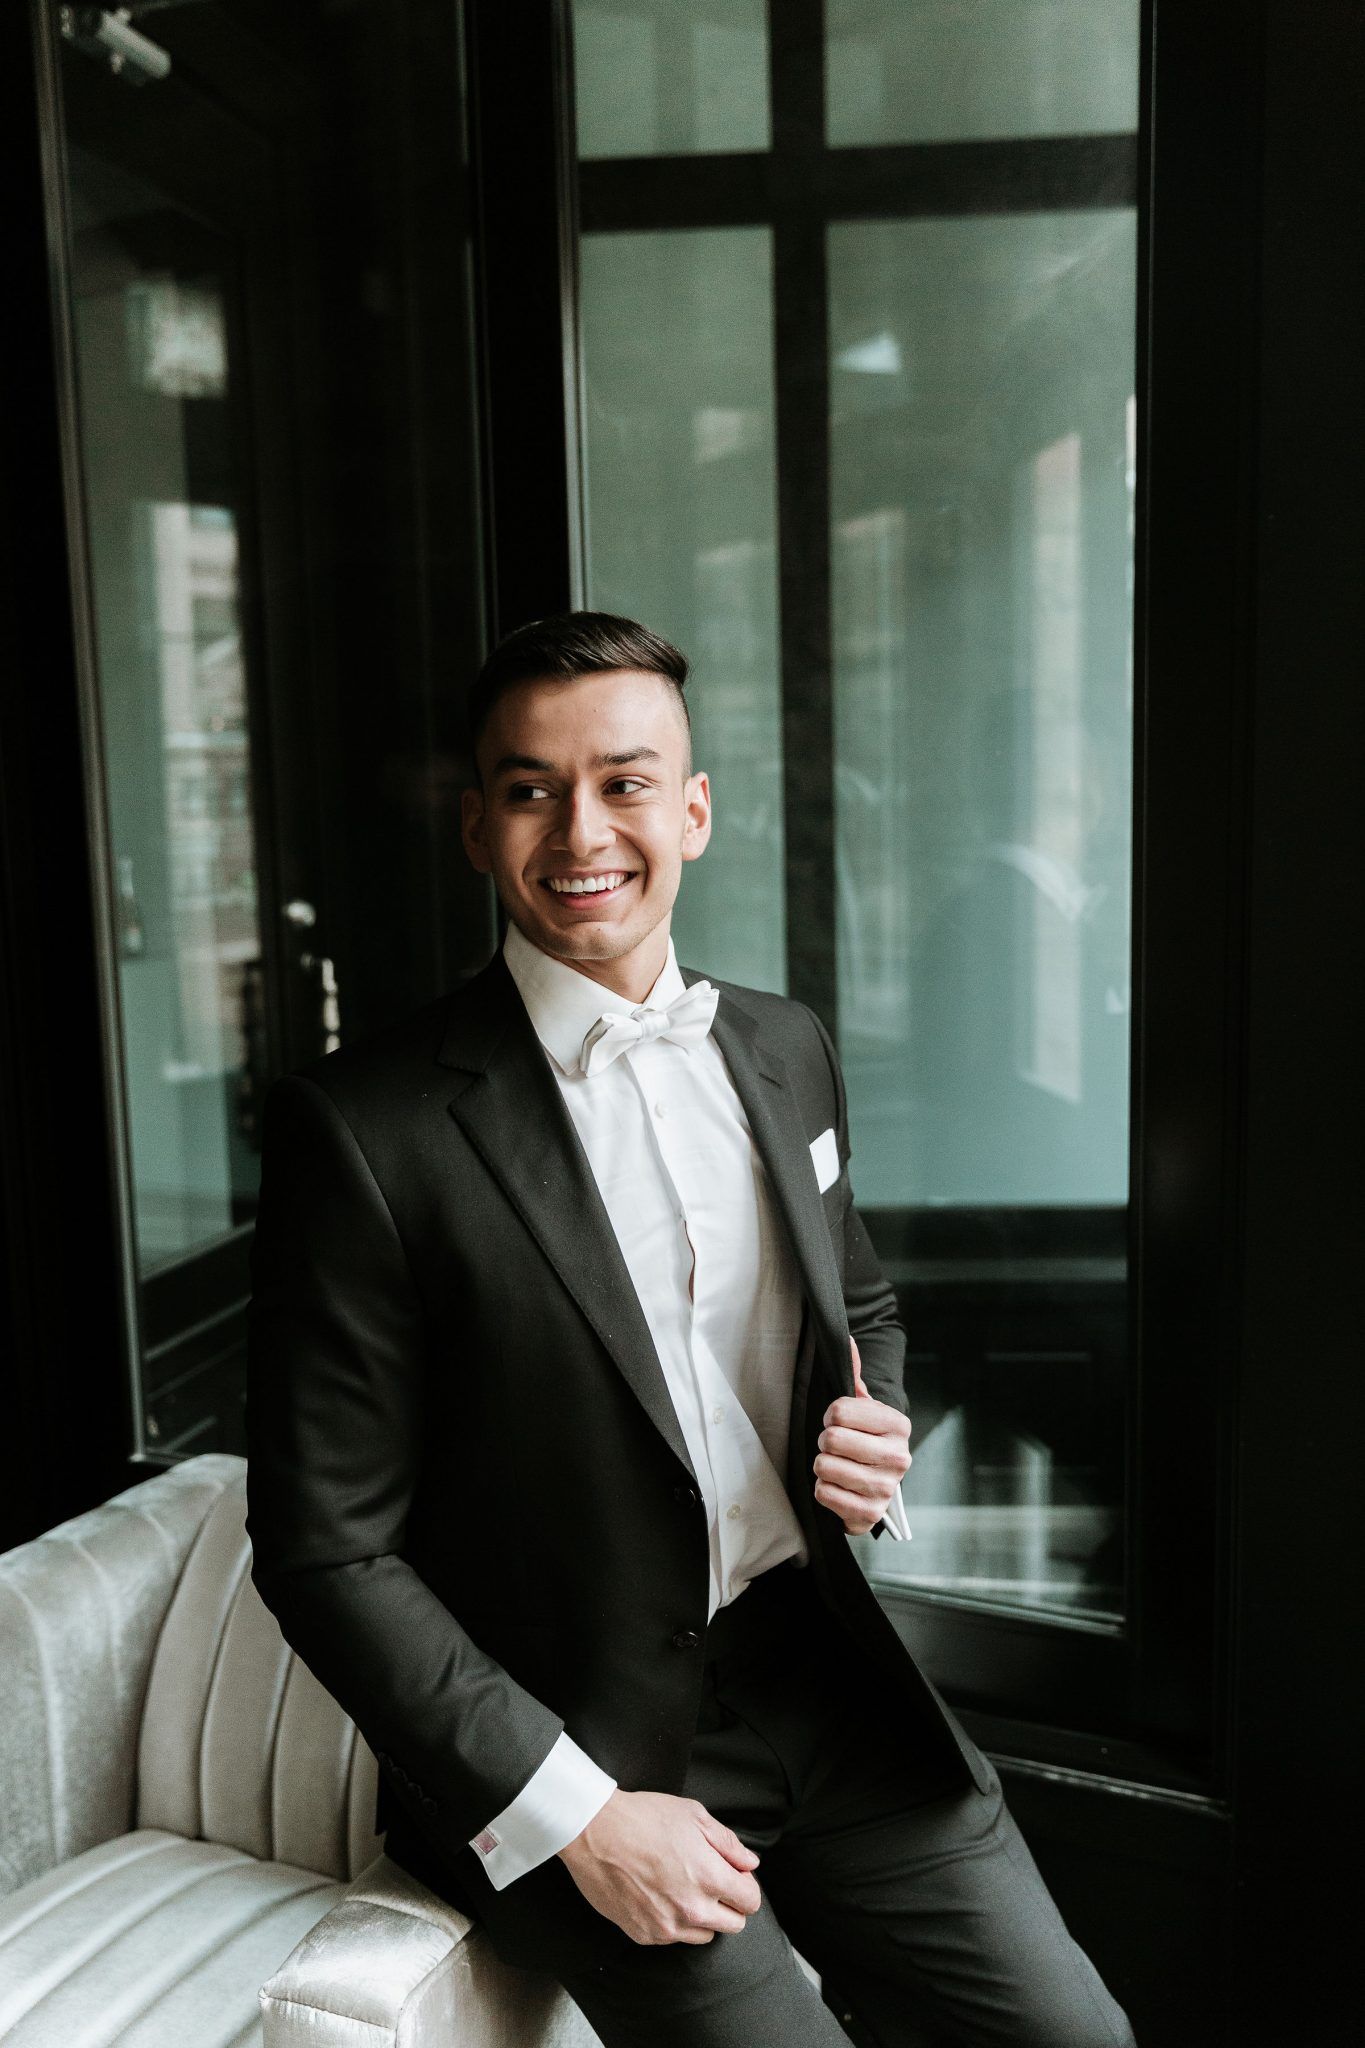 Looking Dapper: 10 Looks for the Modern Groom - on the Bronte Bride Blog, groom style, Calgary Wedding Inspiration Blog, bowtie and suit